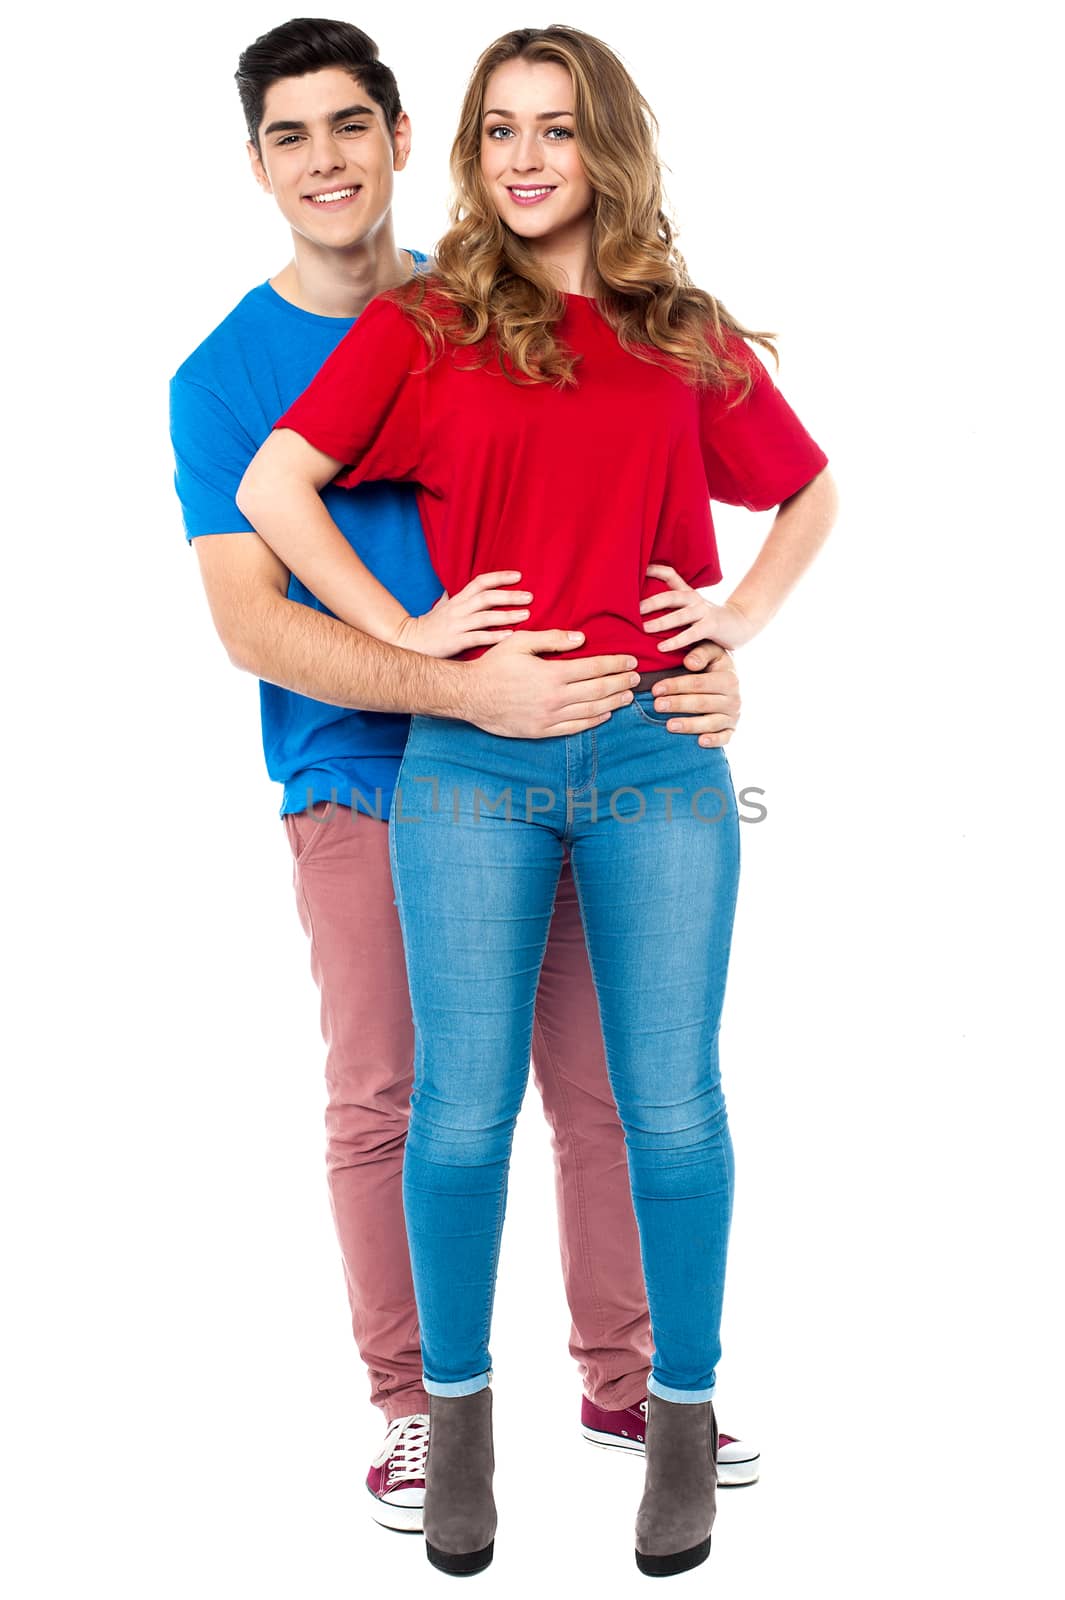 Guy embracing his girl from behind, arms around by stockyimages